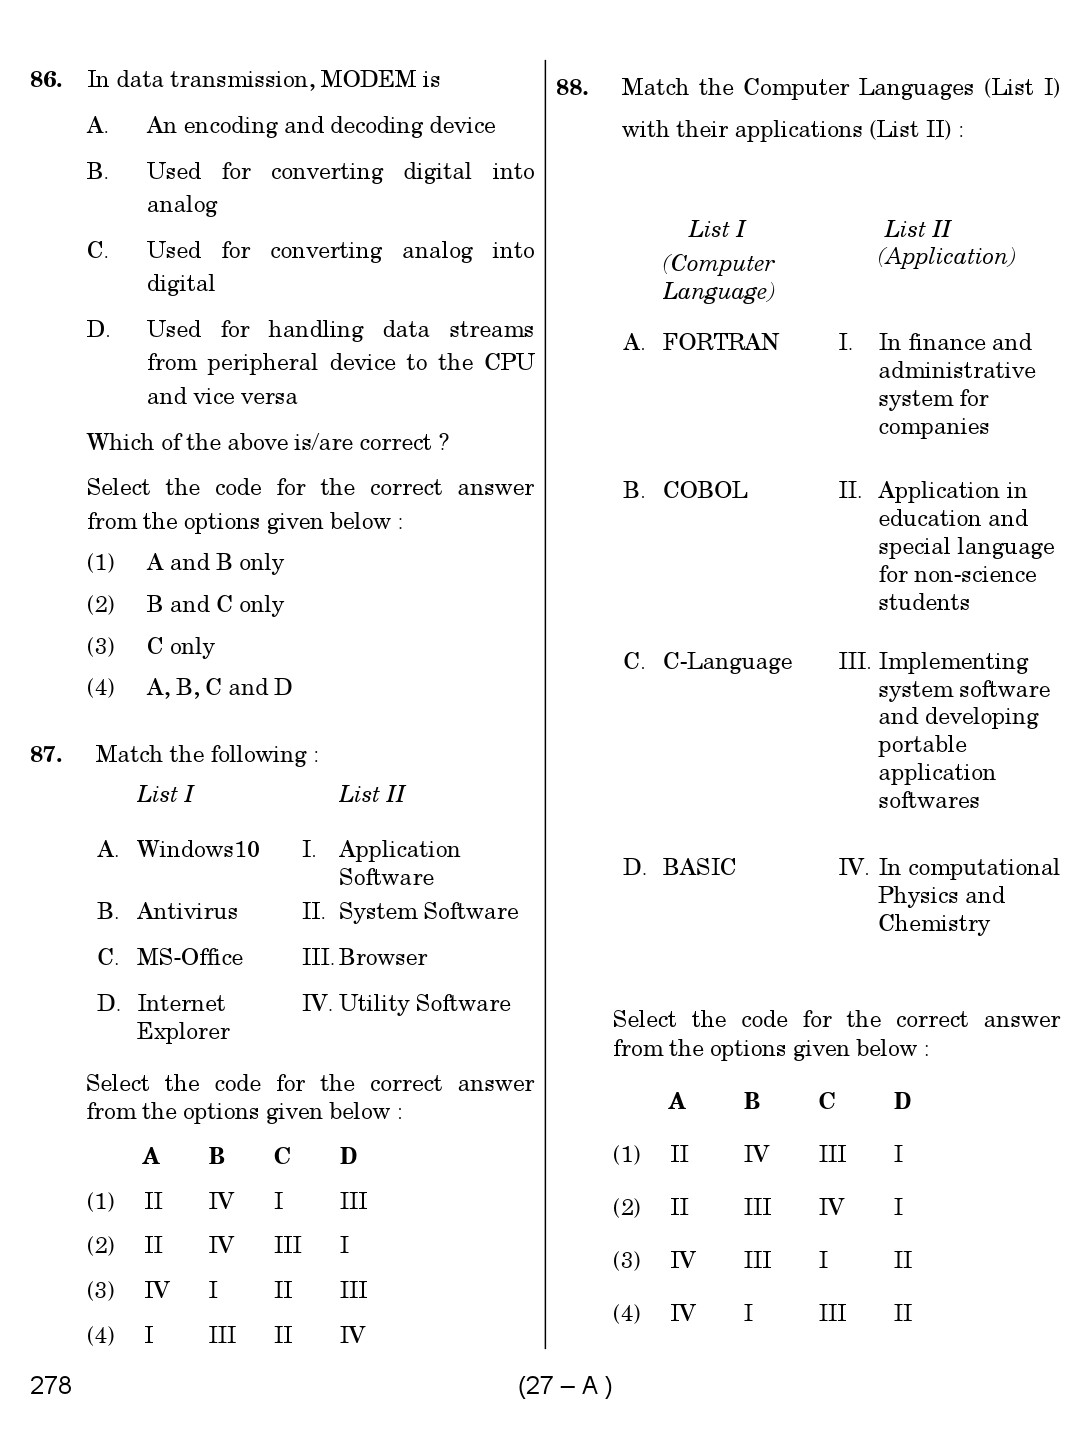 Karnataka PSC First Division Computer Assistants Exam Sample Question Paper 278 27